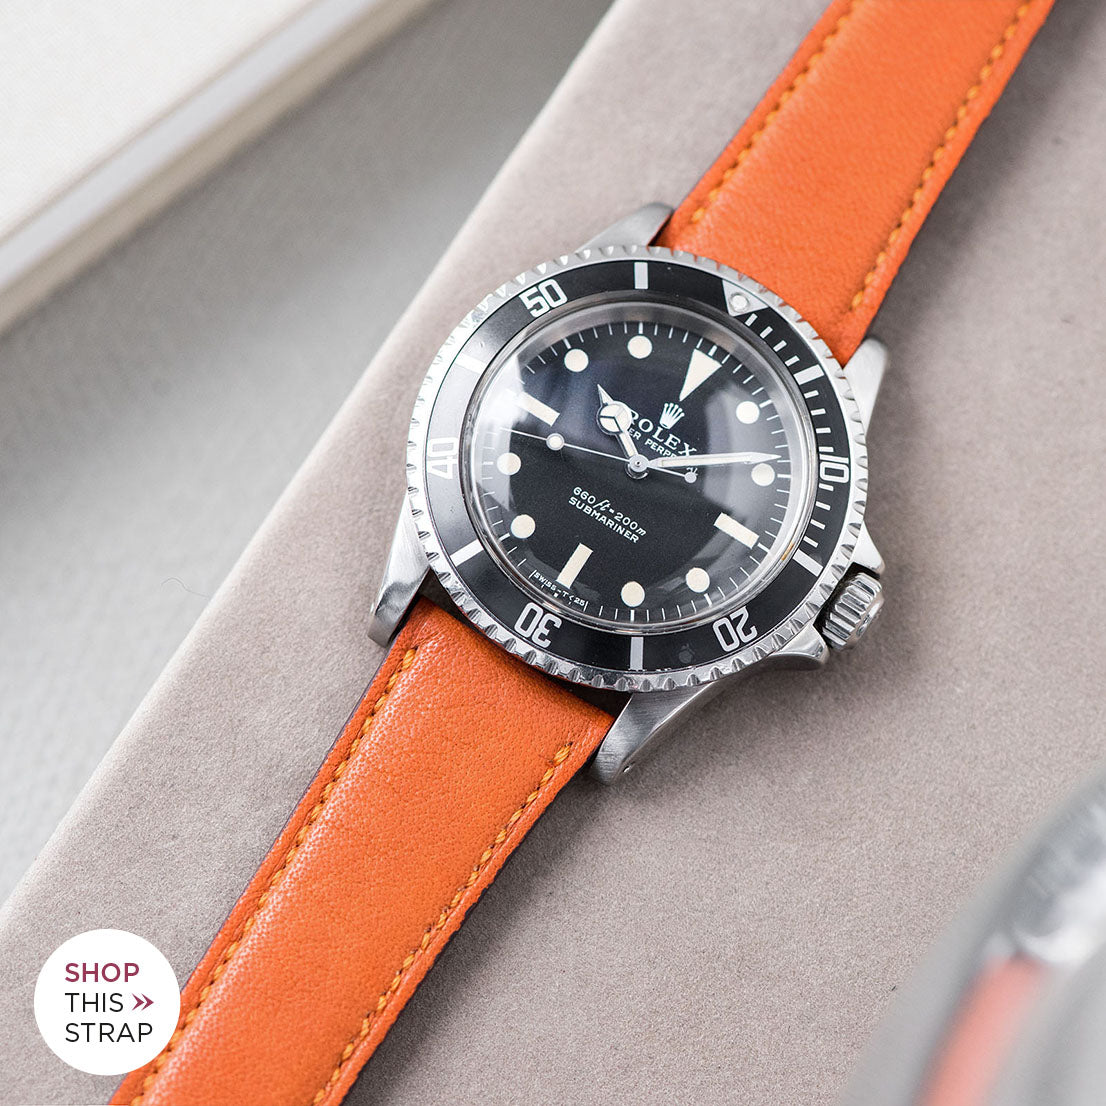 Bulang and Sons_Strap Guide_The Rolex 5513 Black Submariner_City Orange Leather Watch Strap